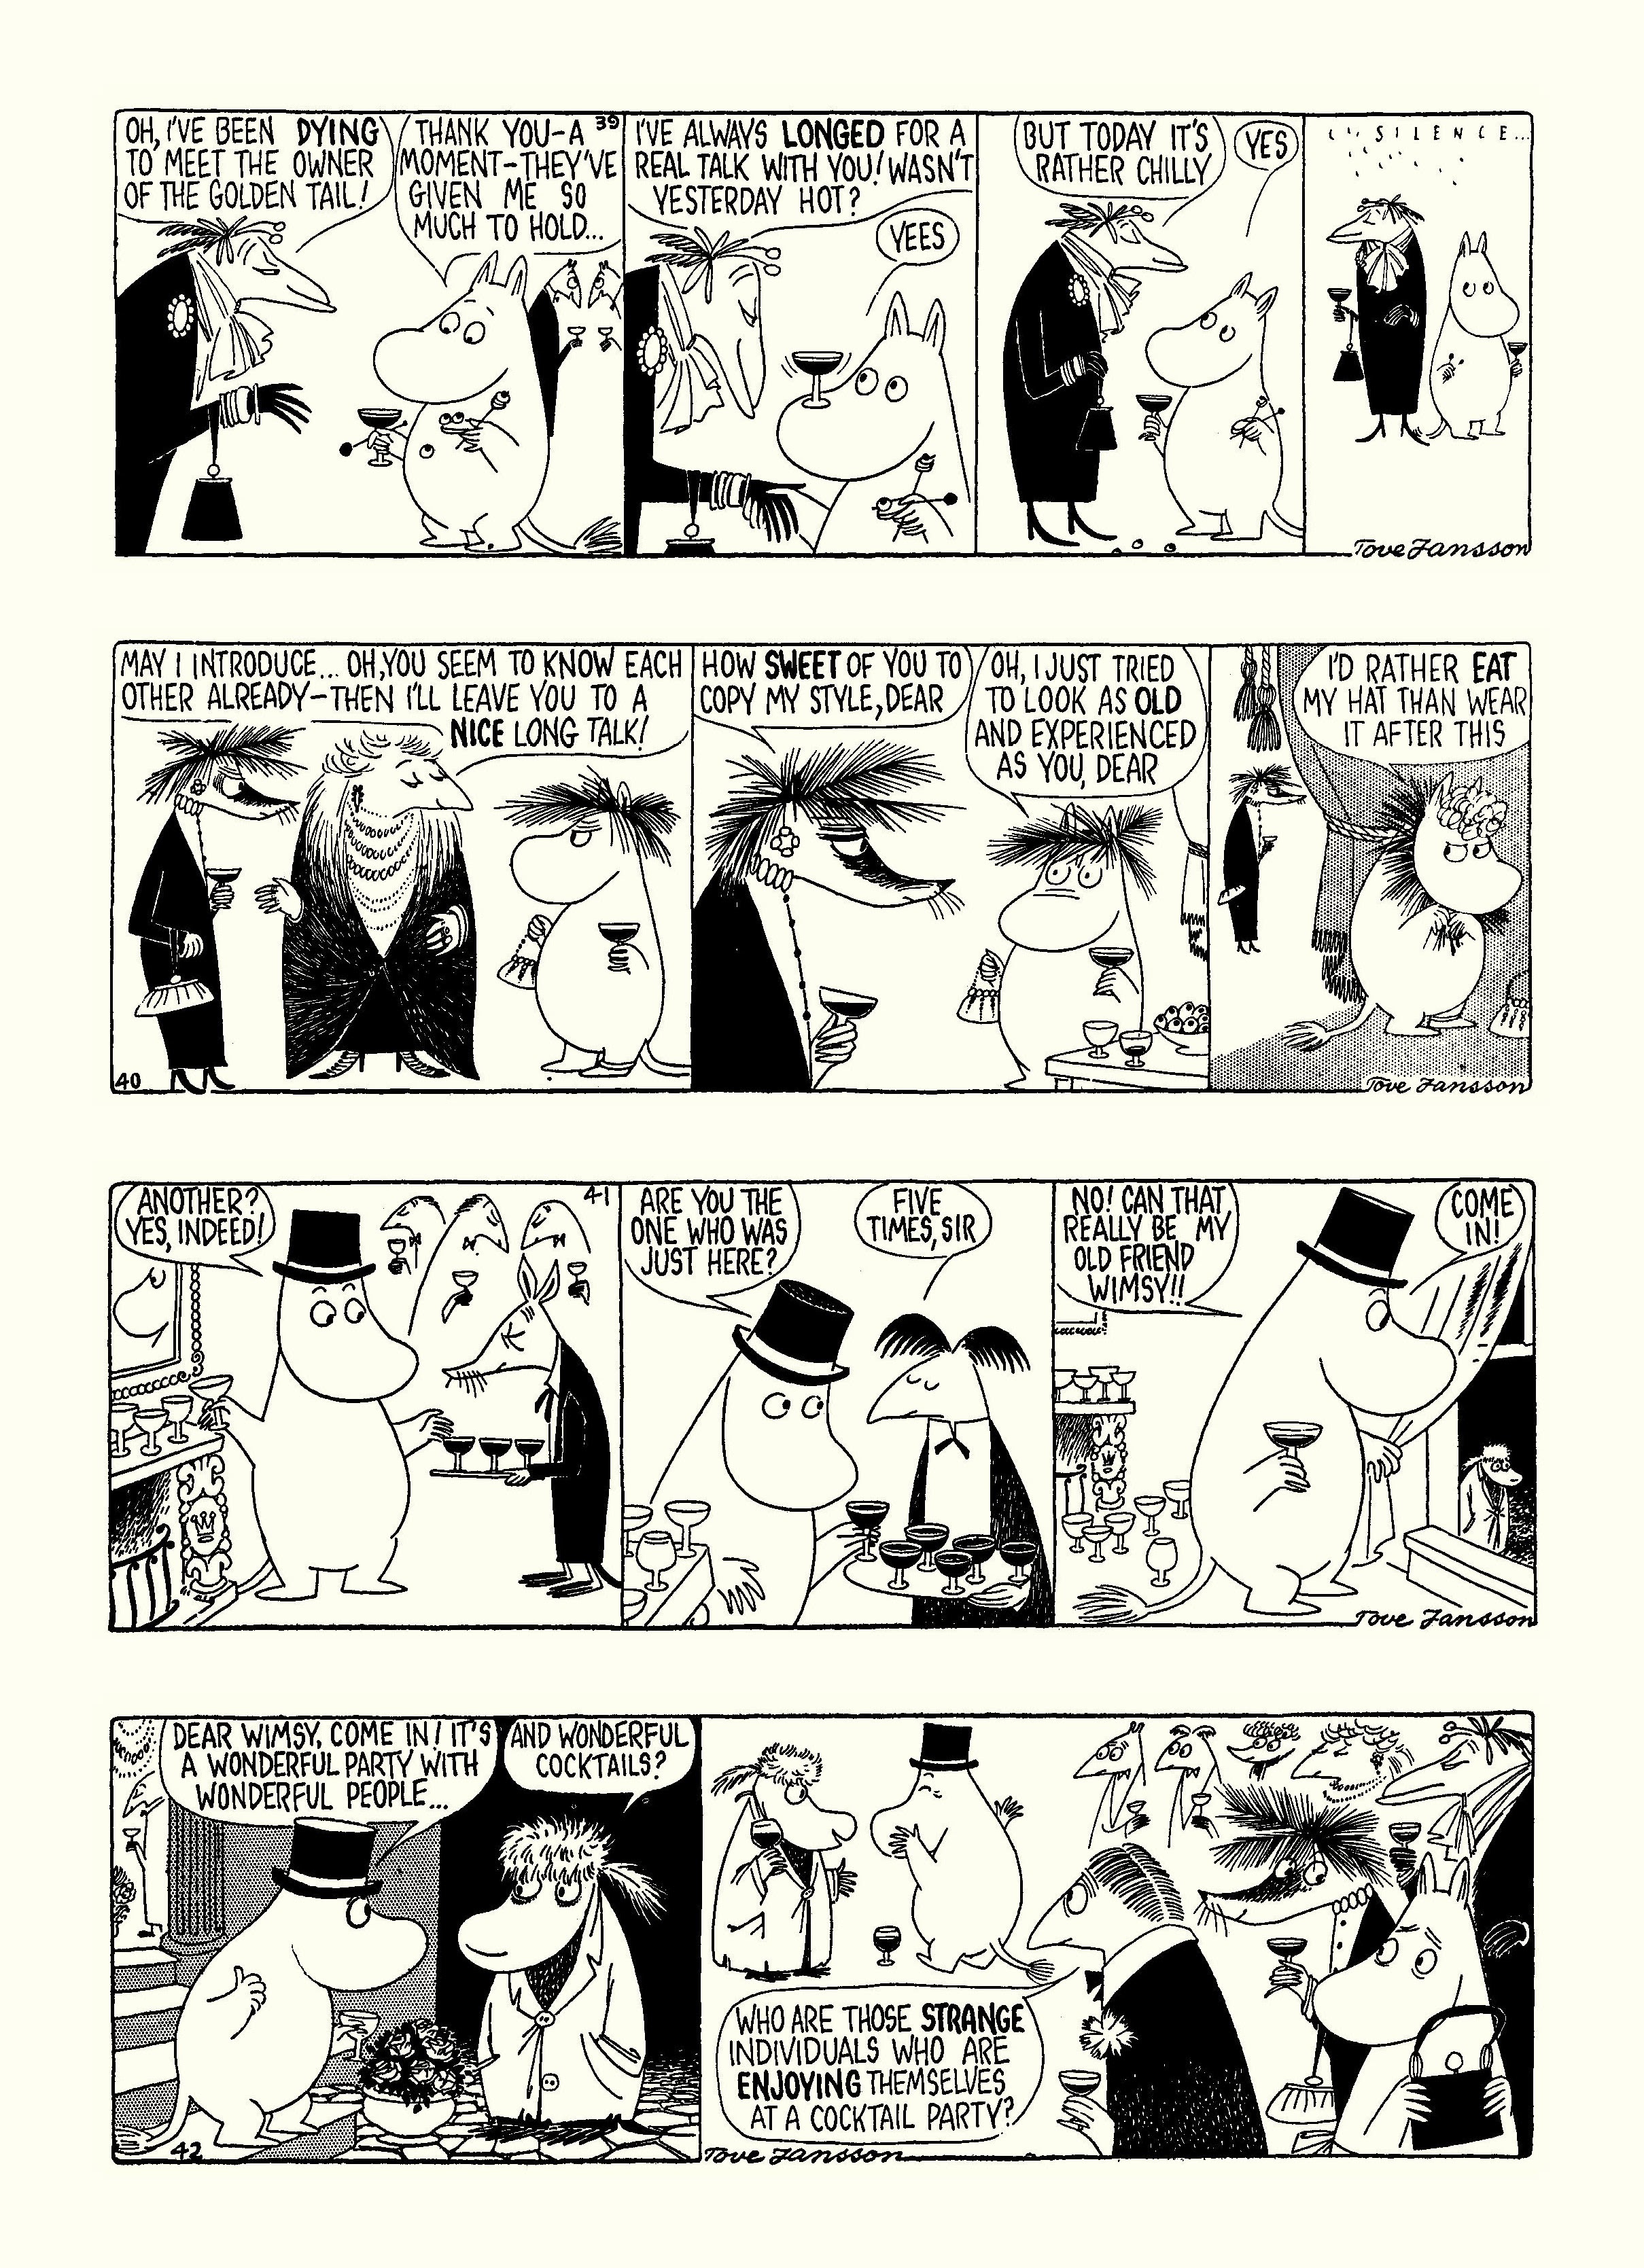 Read online Moomin: The Complete Tove Jansson Comic Strip comic -  Issue # TPB 4 - 89